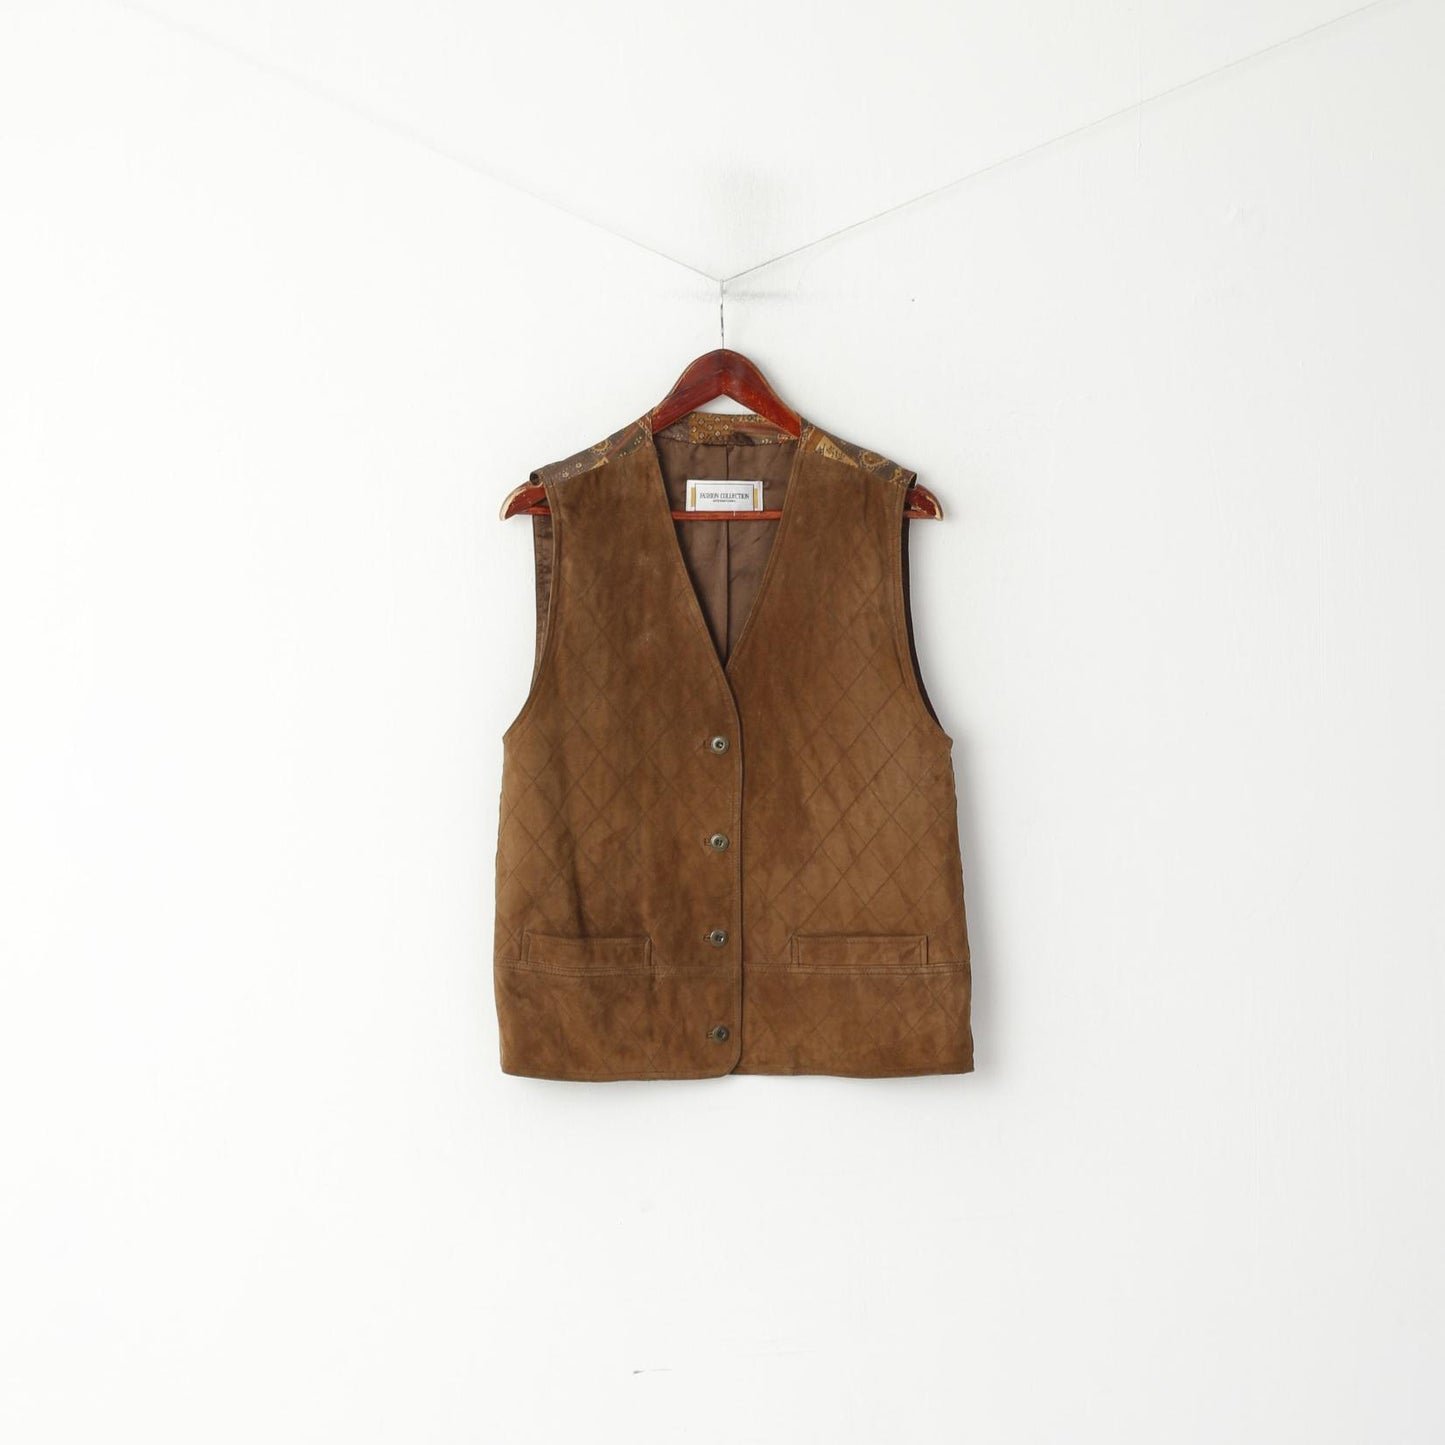 Fashion Collection International Women 14 42 Waistcoat Brown Leather Vintage Vest Top